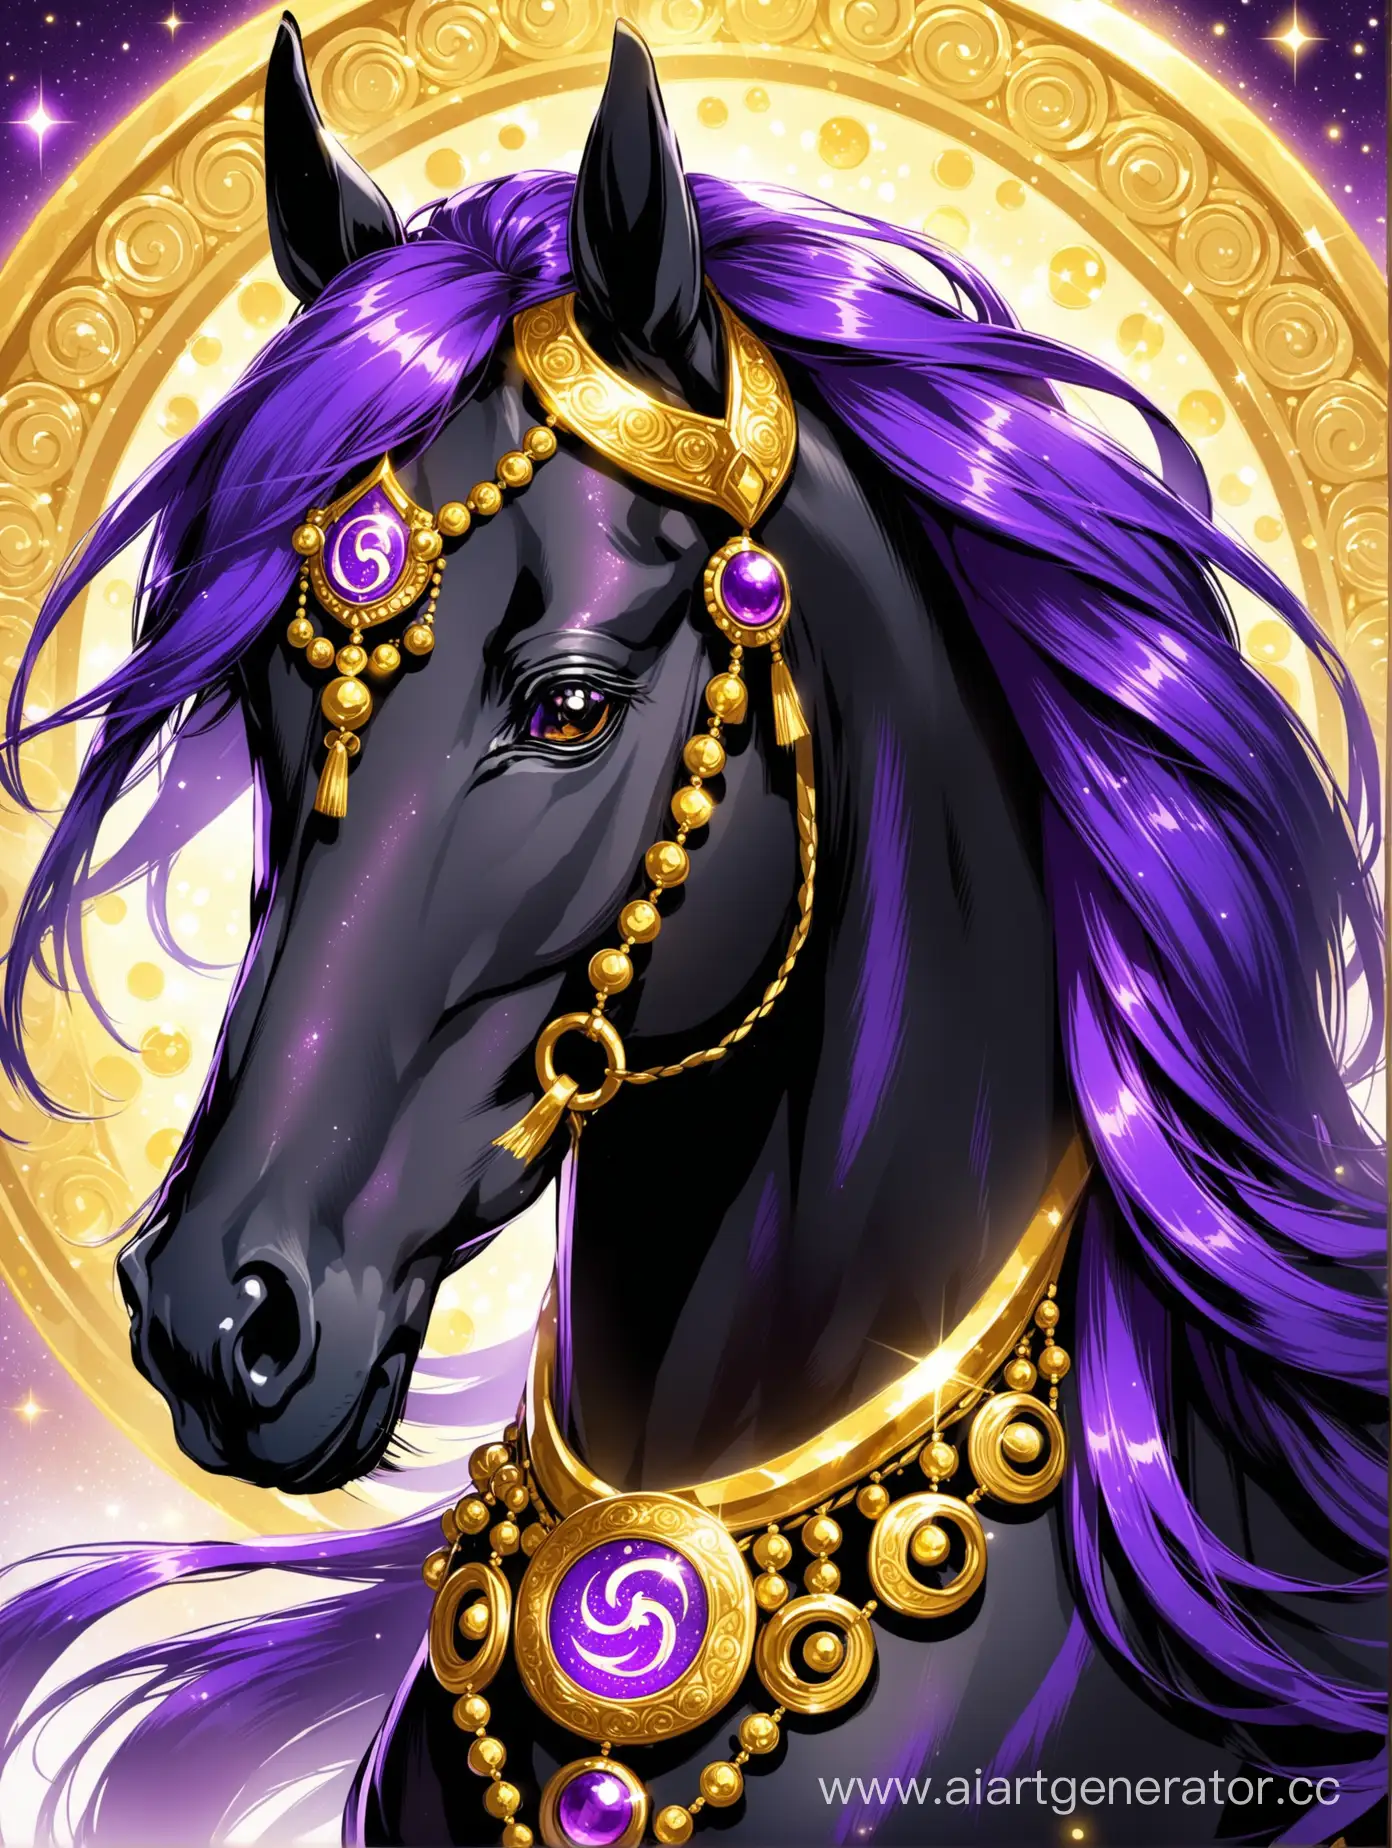 Majestic-Black-Horse-with-Violet-Mane-and-Golden-Ornaments